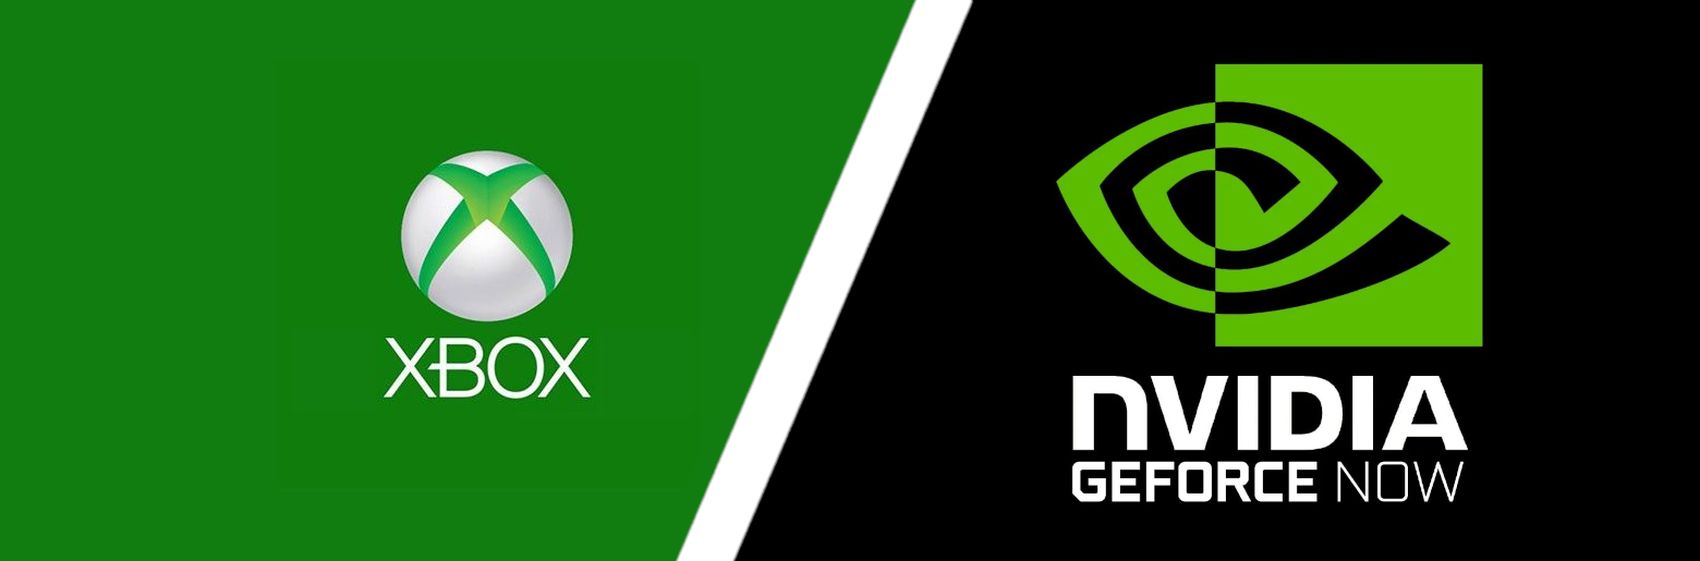 Image for Microsoft and Nvidia ink deal to bring Xbox PC games and Call of Duty to GeForce Now